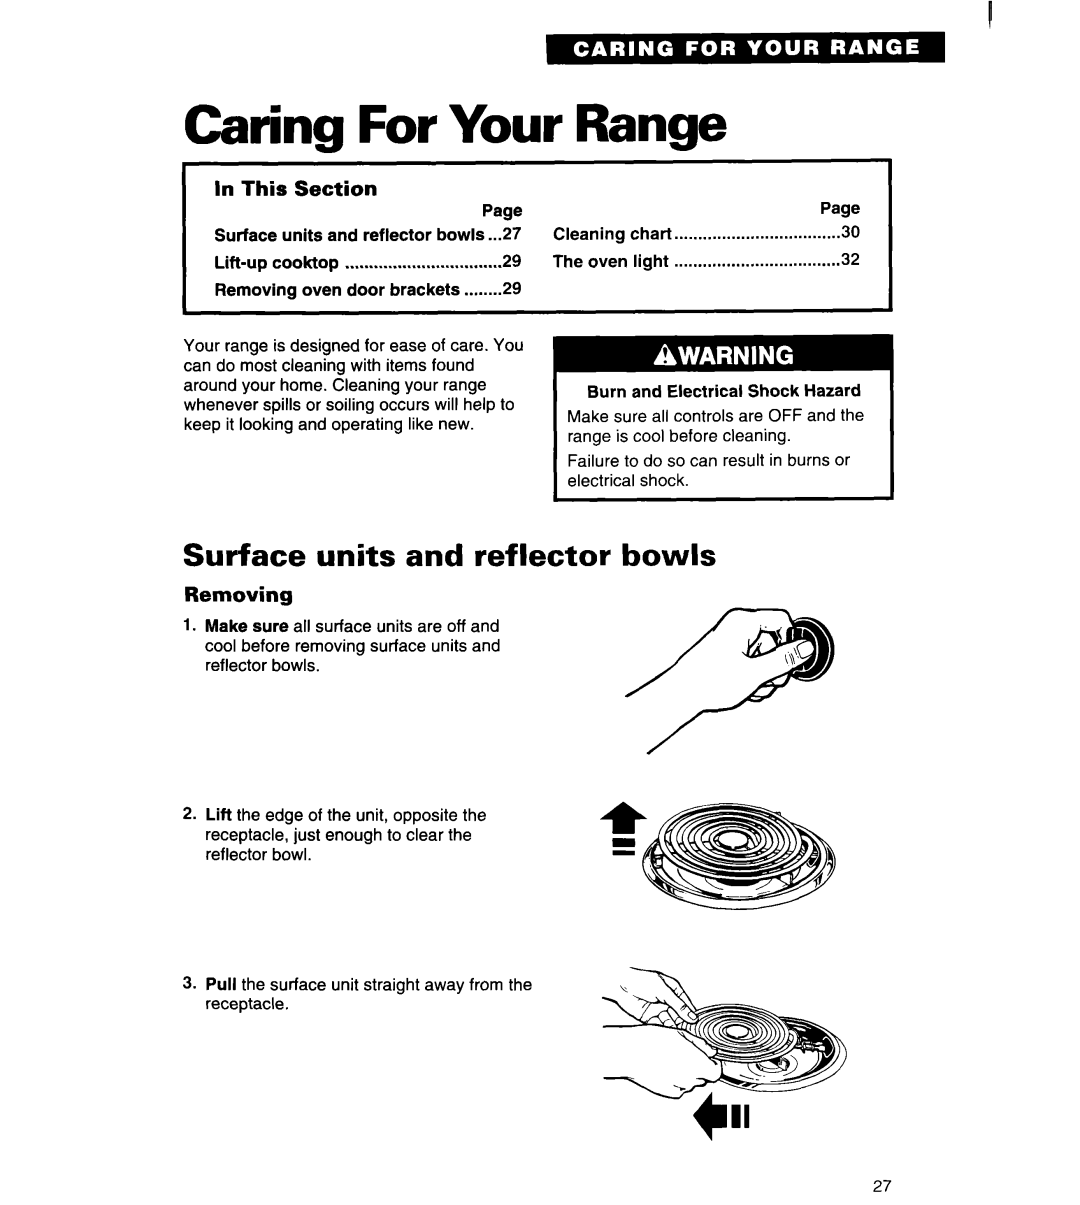 Roper FGP335Y Surface units and reflector bowls, Caring For Your Range, In This Section, Removing 